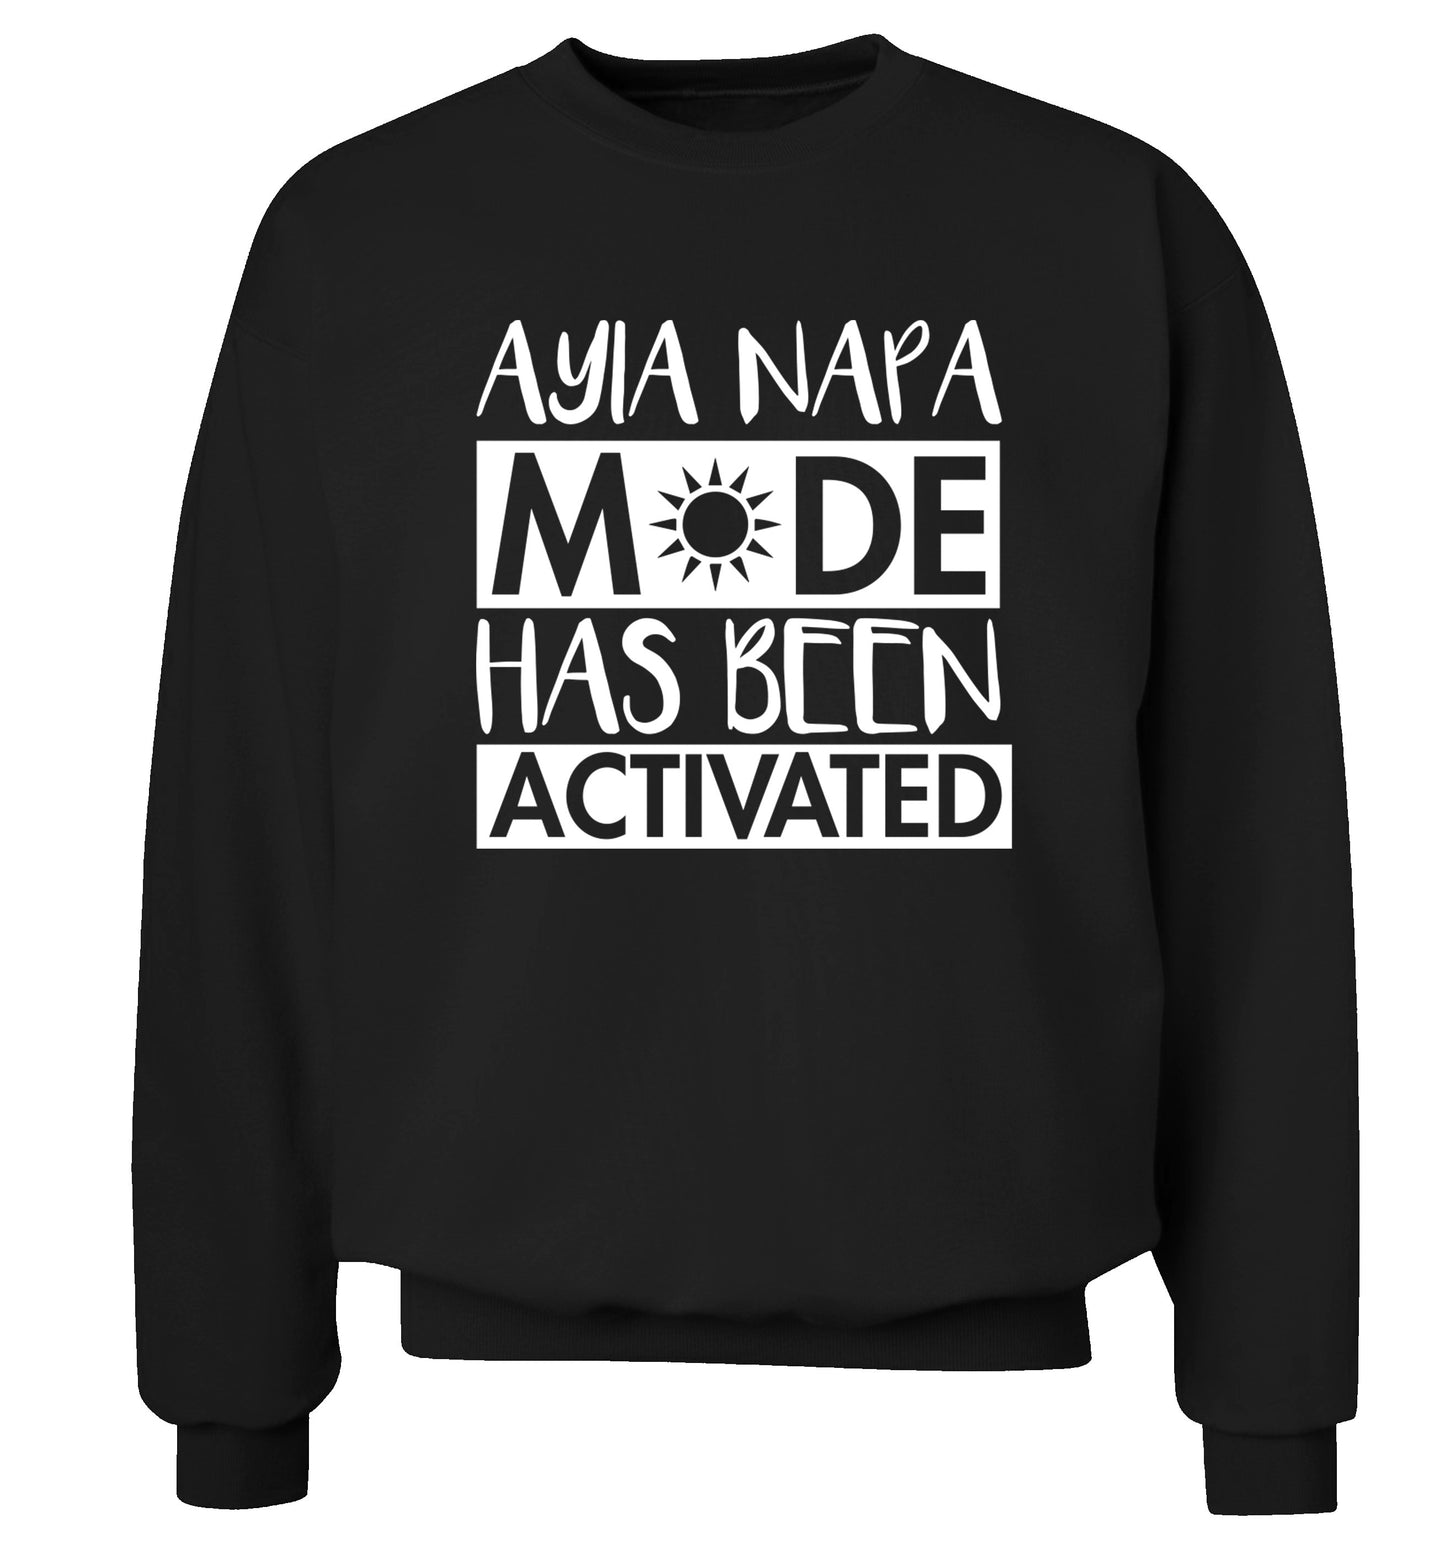 Aiya Napa mode has been activated Adult's unisex black Sweater 2XL